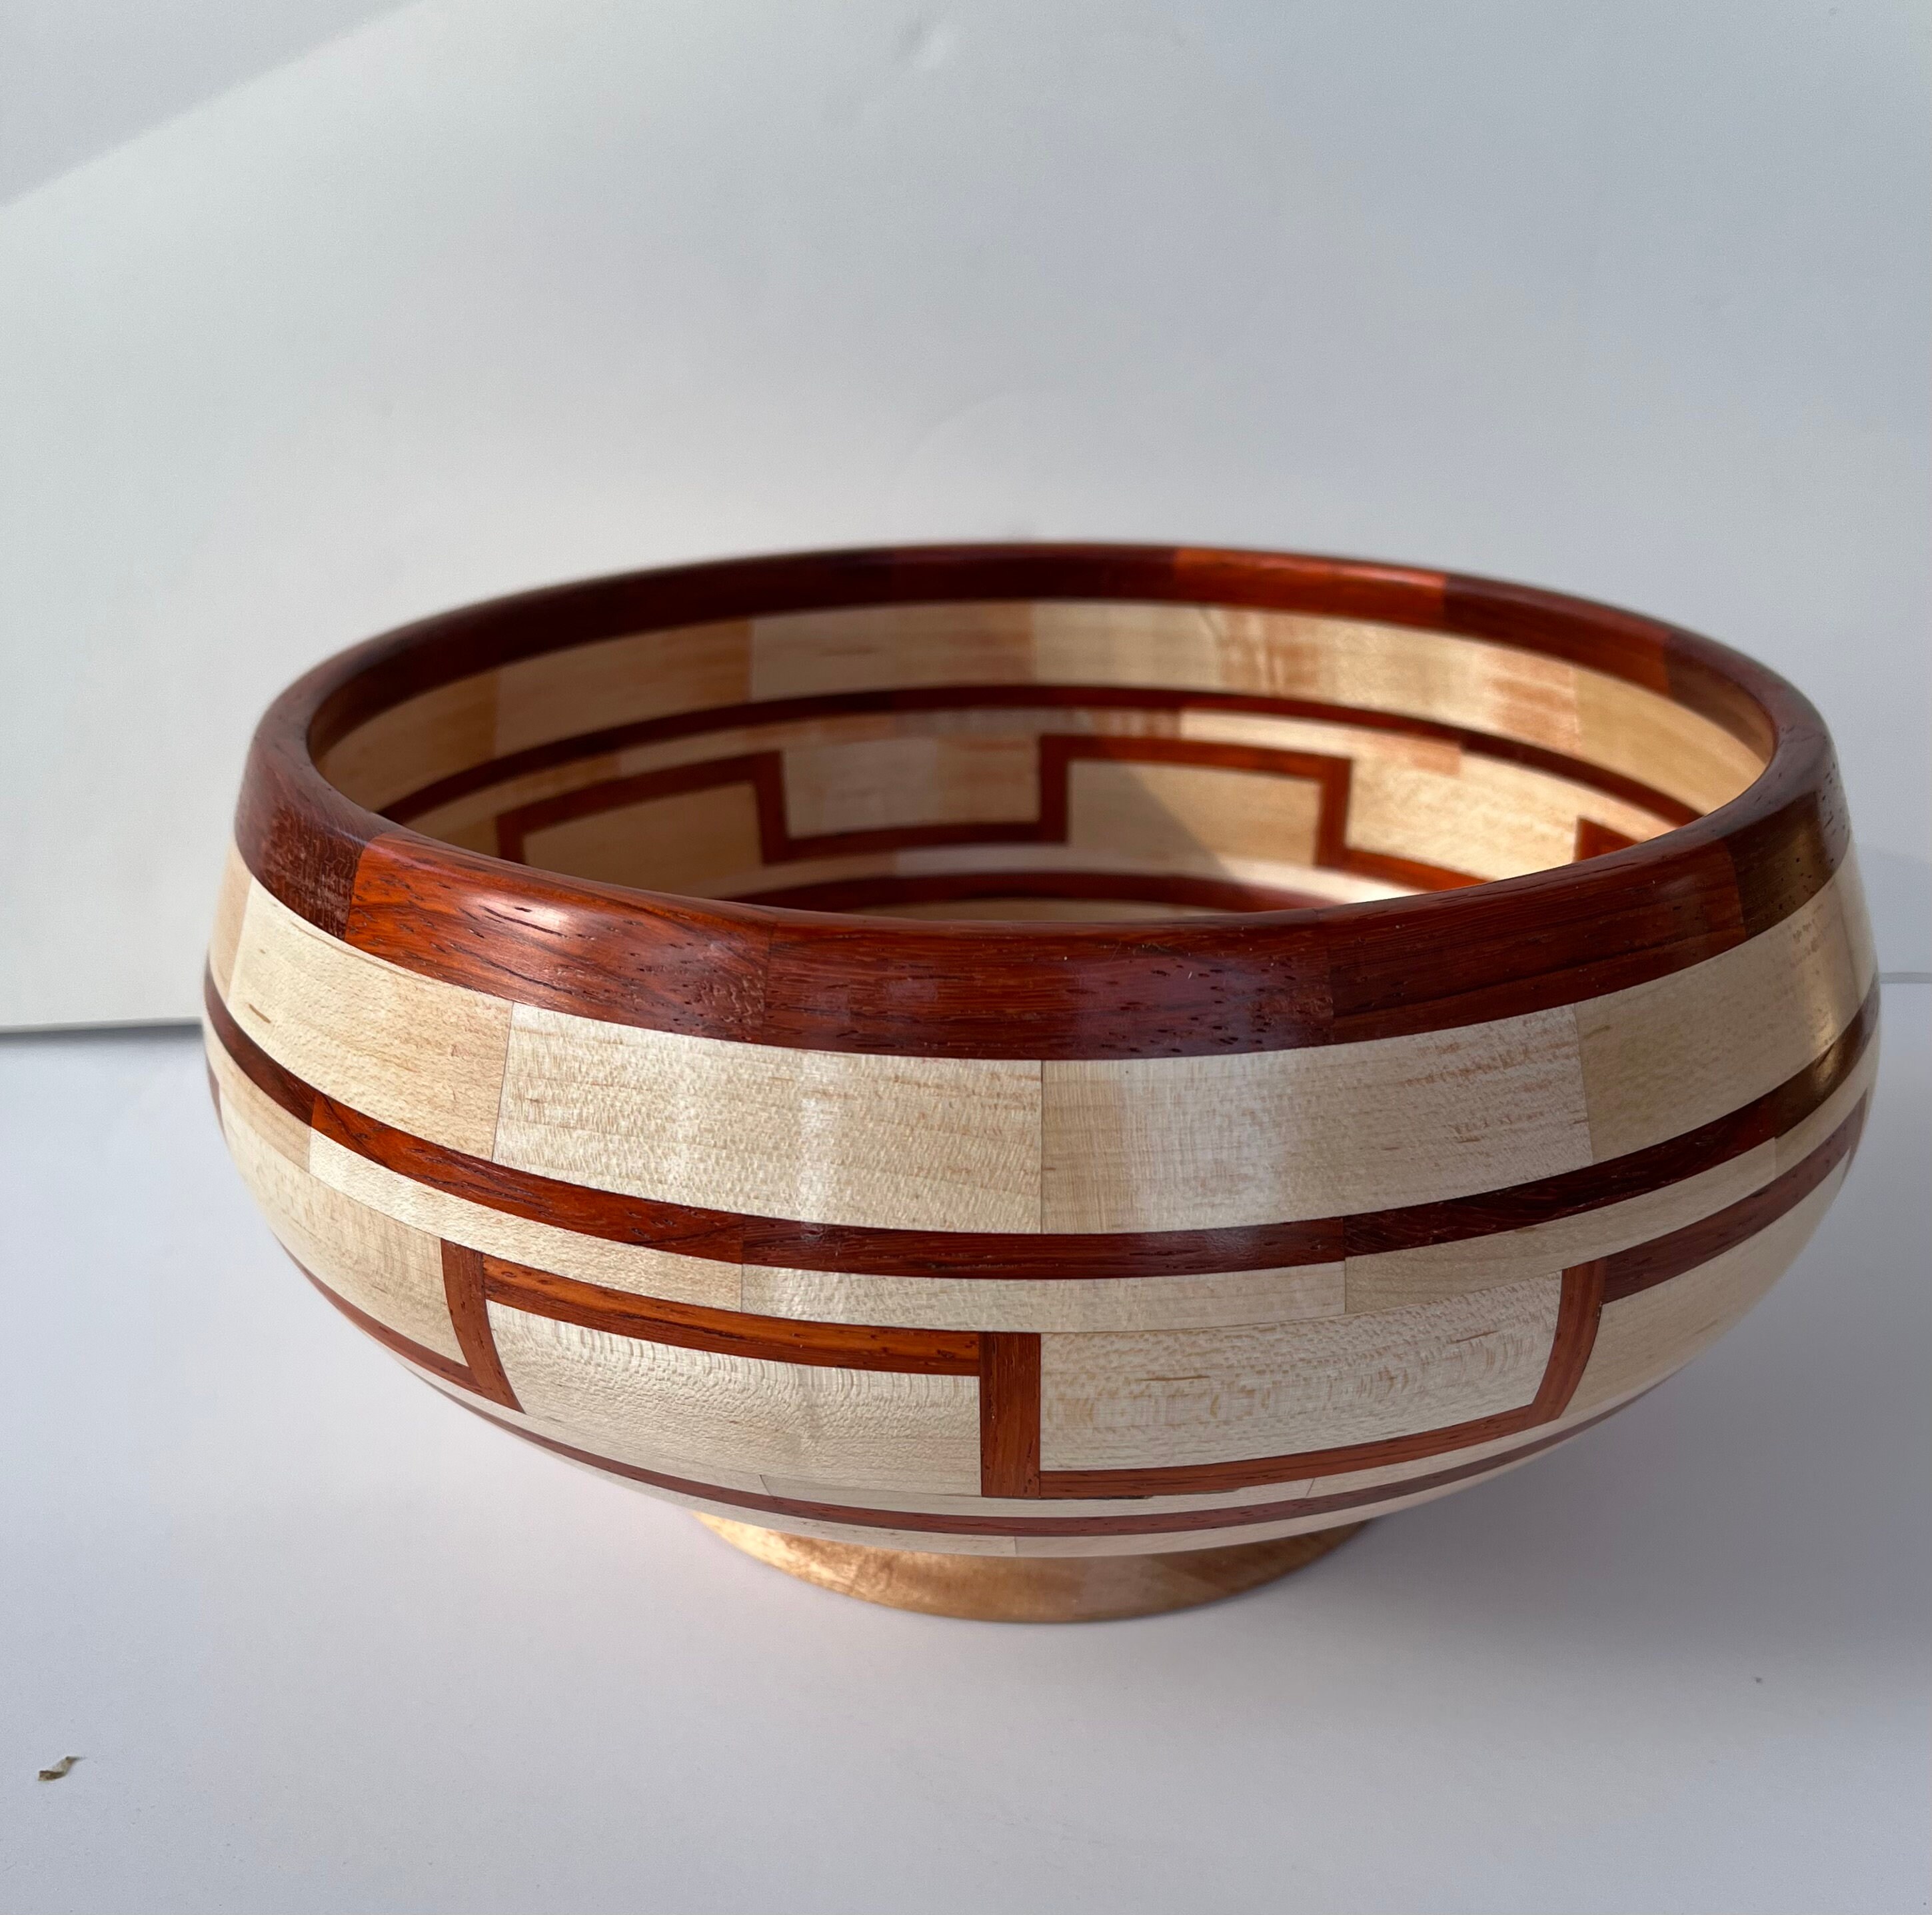 ahanzhu Wooden Wool Ball Storage Bowl Handmade Wood Making Textile Wool Coil Wooden Bowl Round Wooden Bowl Made Bamboo Wood 